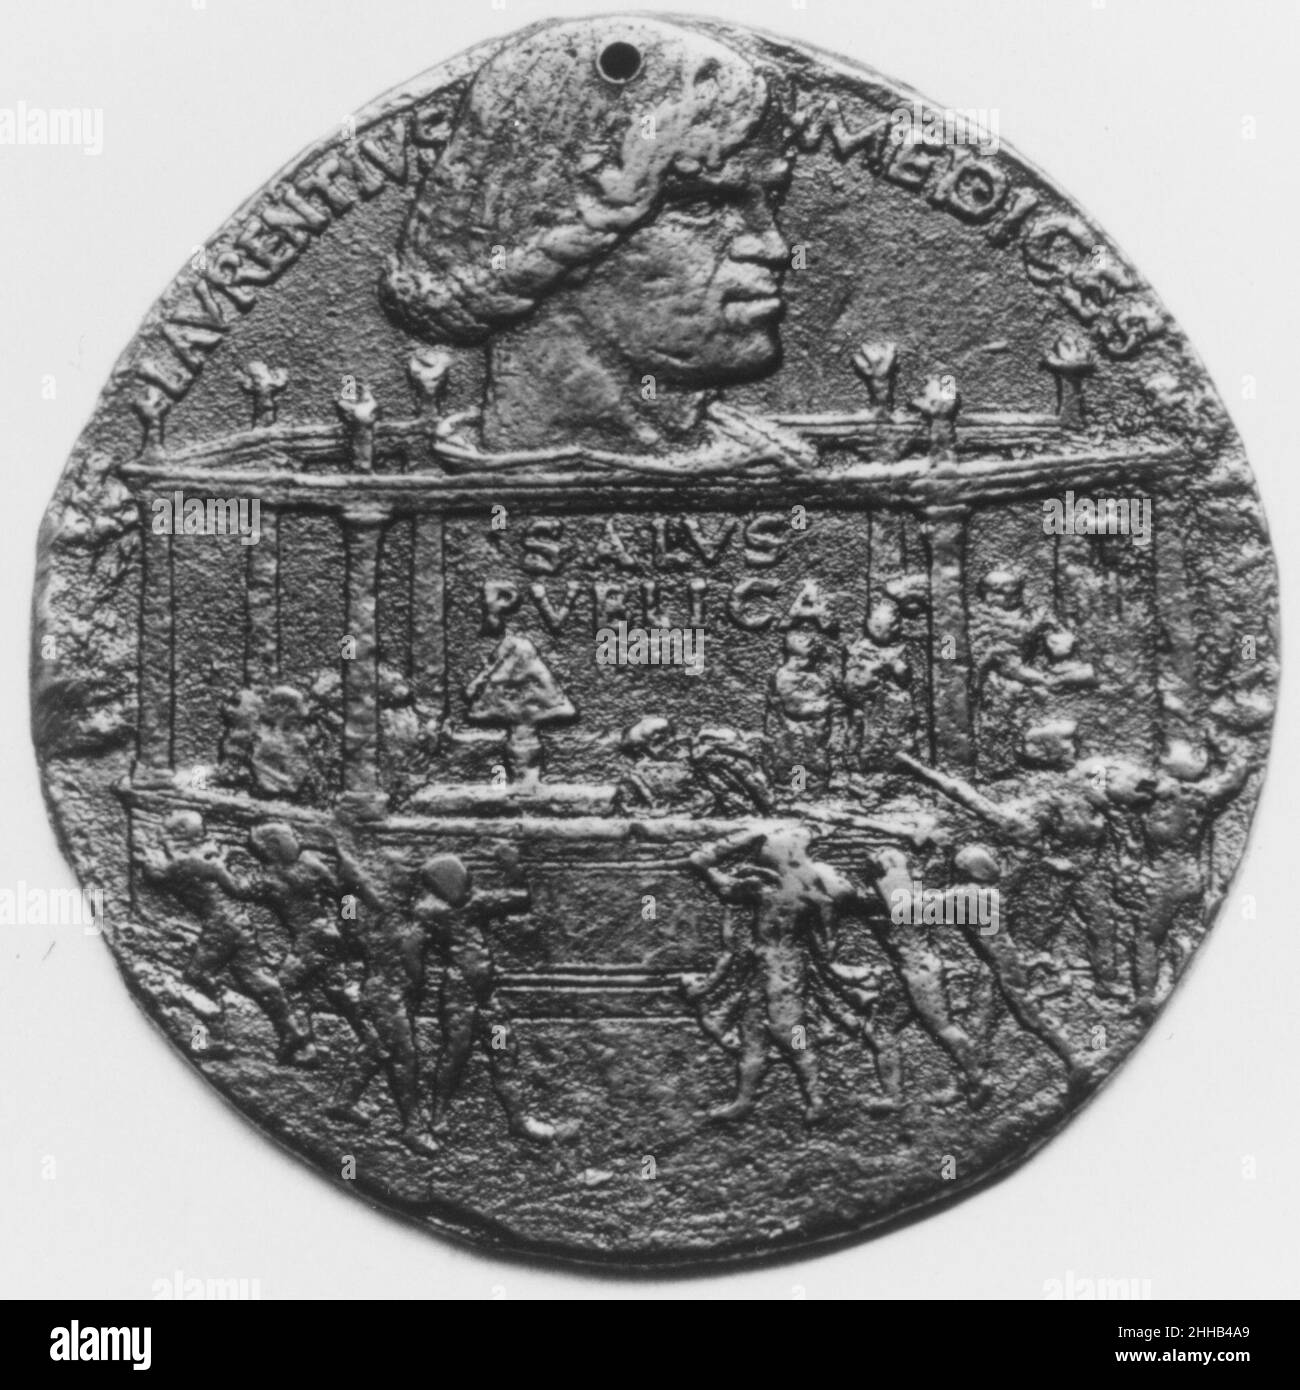 To Commemorate the Pazzi Conspiracy, 1478 1478 Medalist: Bertoldo di Giovanni Italian Obverse: Medals of rulers were thought inappropriate in republican Florence. This piece commemorates the 1478 attack in Florence Cathedral on the Medici, first citizens but not rulers of the city. To make it acceptable, it flouts the rules of medals by combining portrait and narrative on both sides. This side, labeled ‘Public grief’, shows the head and, below, the murder of Giuliano de’ Medici, Lorenzo’s younger brother.Reverse: Modeled and cast in 1478, immediately after Lorenzo de’ Medici survived a murdero Stock Photo